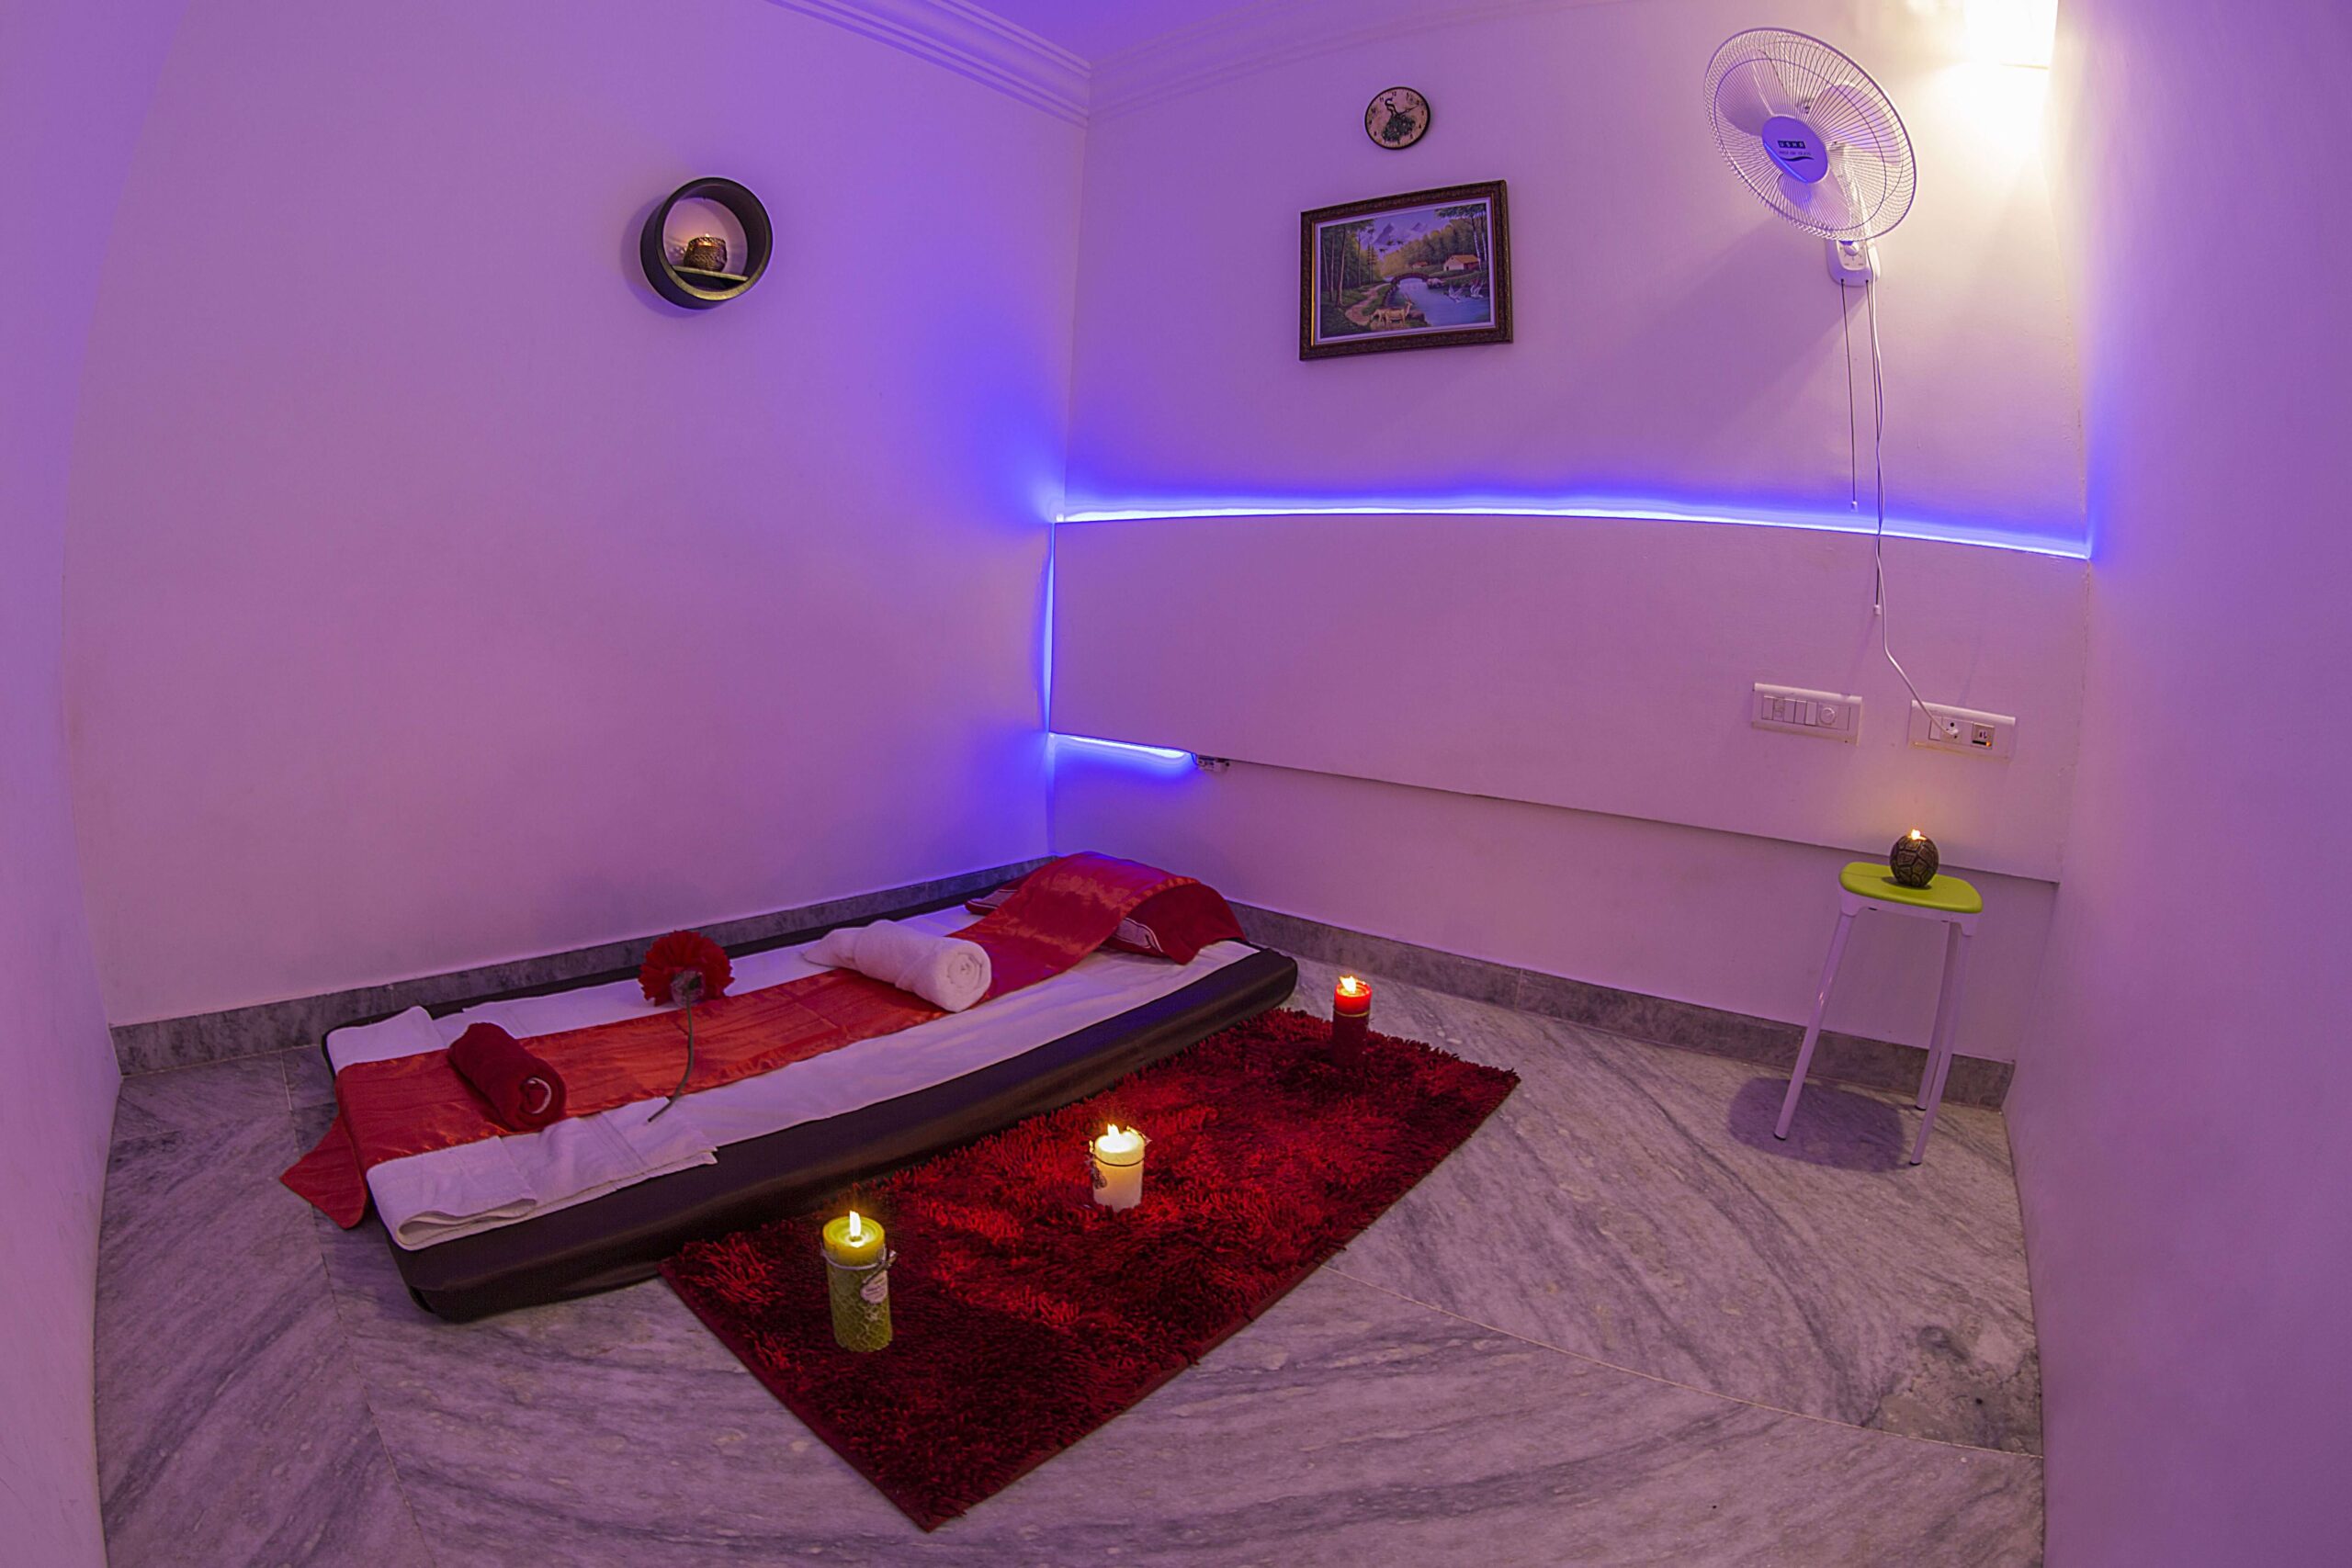 A longer view of relaxed massage room in a spa with a flat bed and towels rolled on into it . A beautiful red color rug with different colored big candles lighten up . A wall mounted fan to provide fresh air in the room. Some candles are kept on the chair and on the wall to improve the freshness of the room with mild lighting in the background.